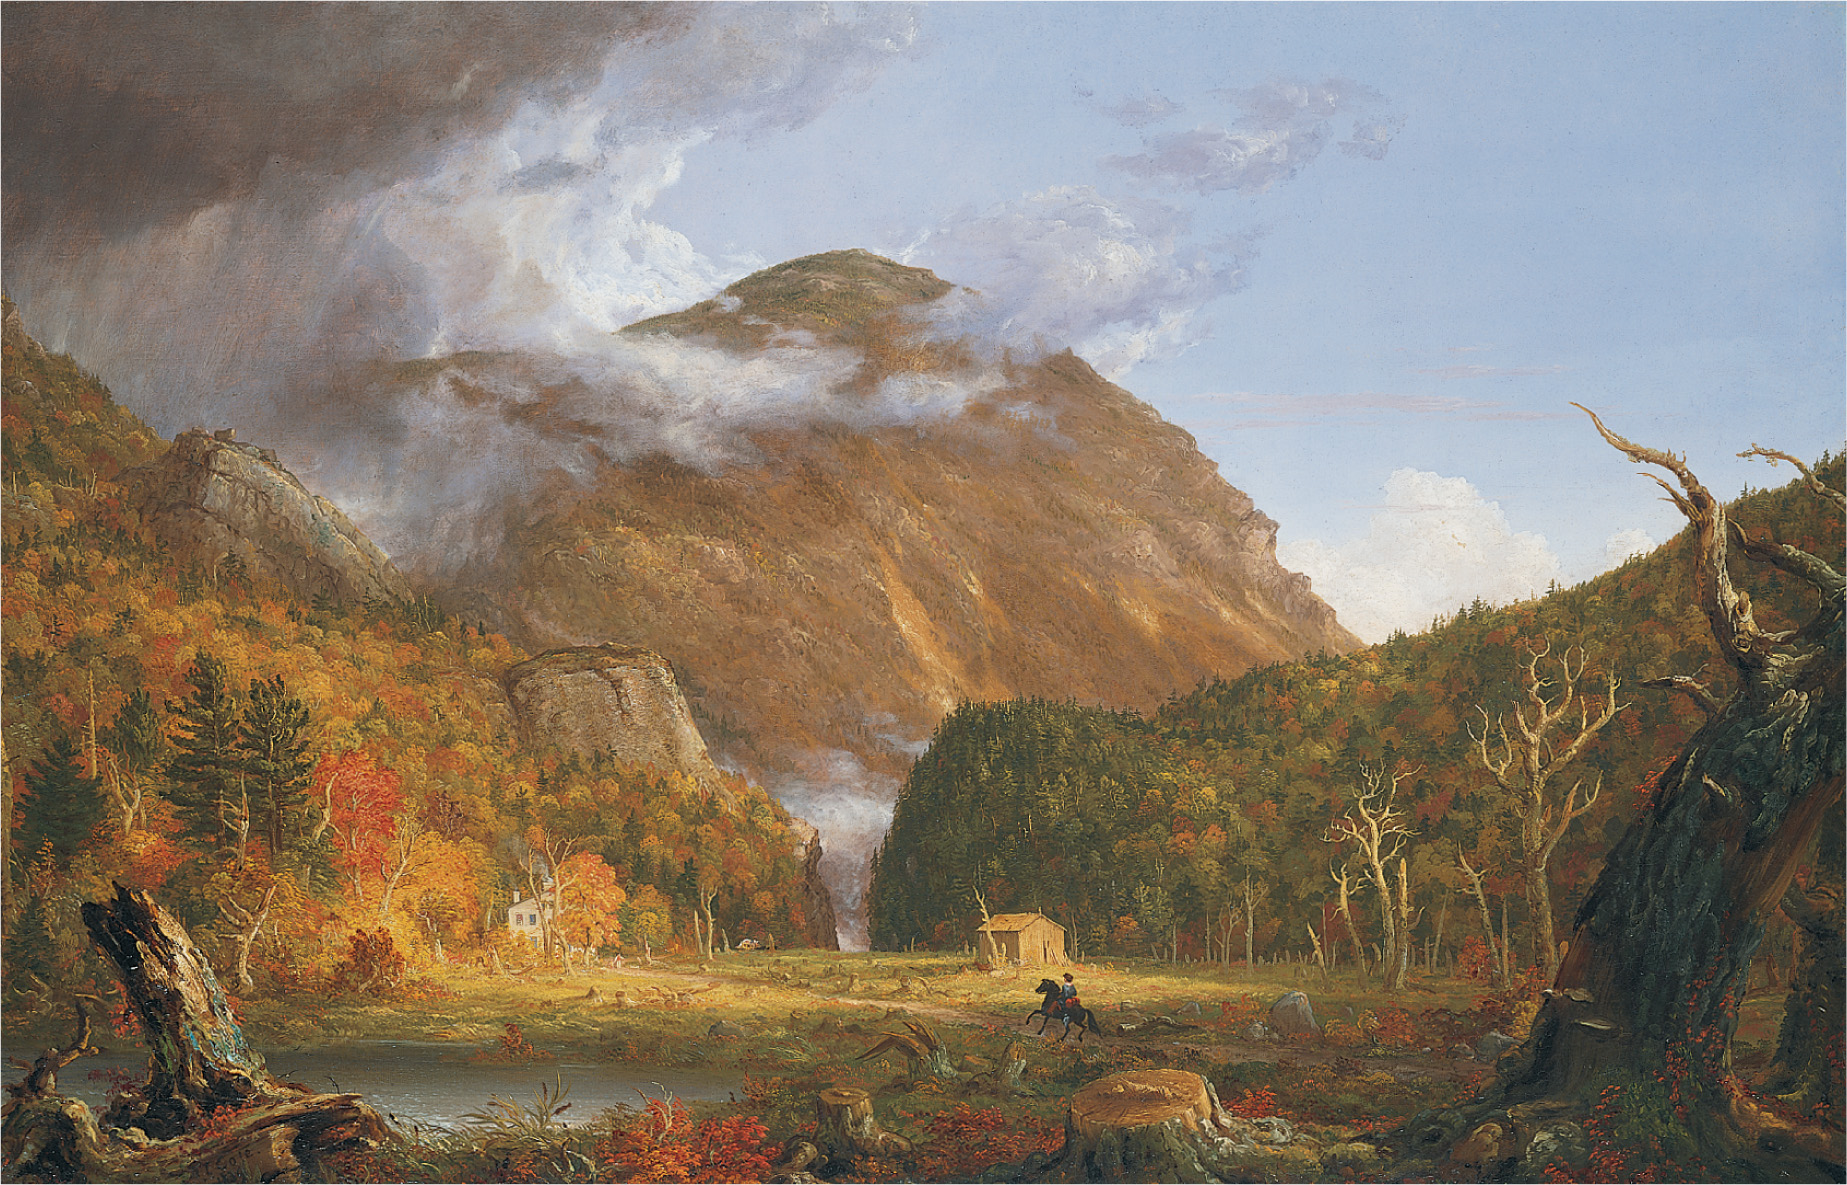 A painting: wispy clouds
hang in the sky near the top of a green mountain. Below, a cabin stands by a narrow opening between
two high, tree-covered ridges.